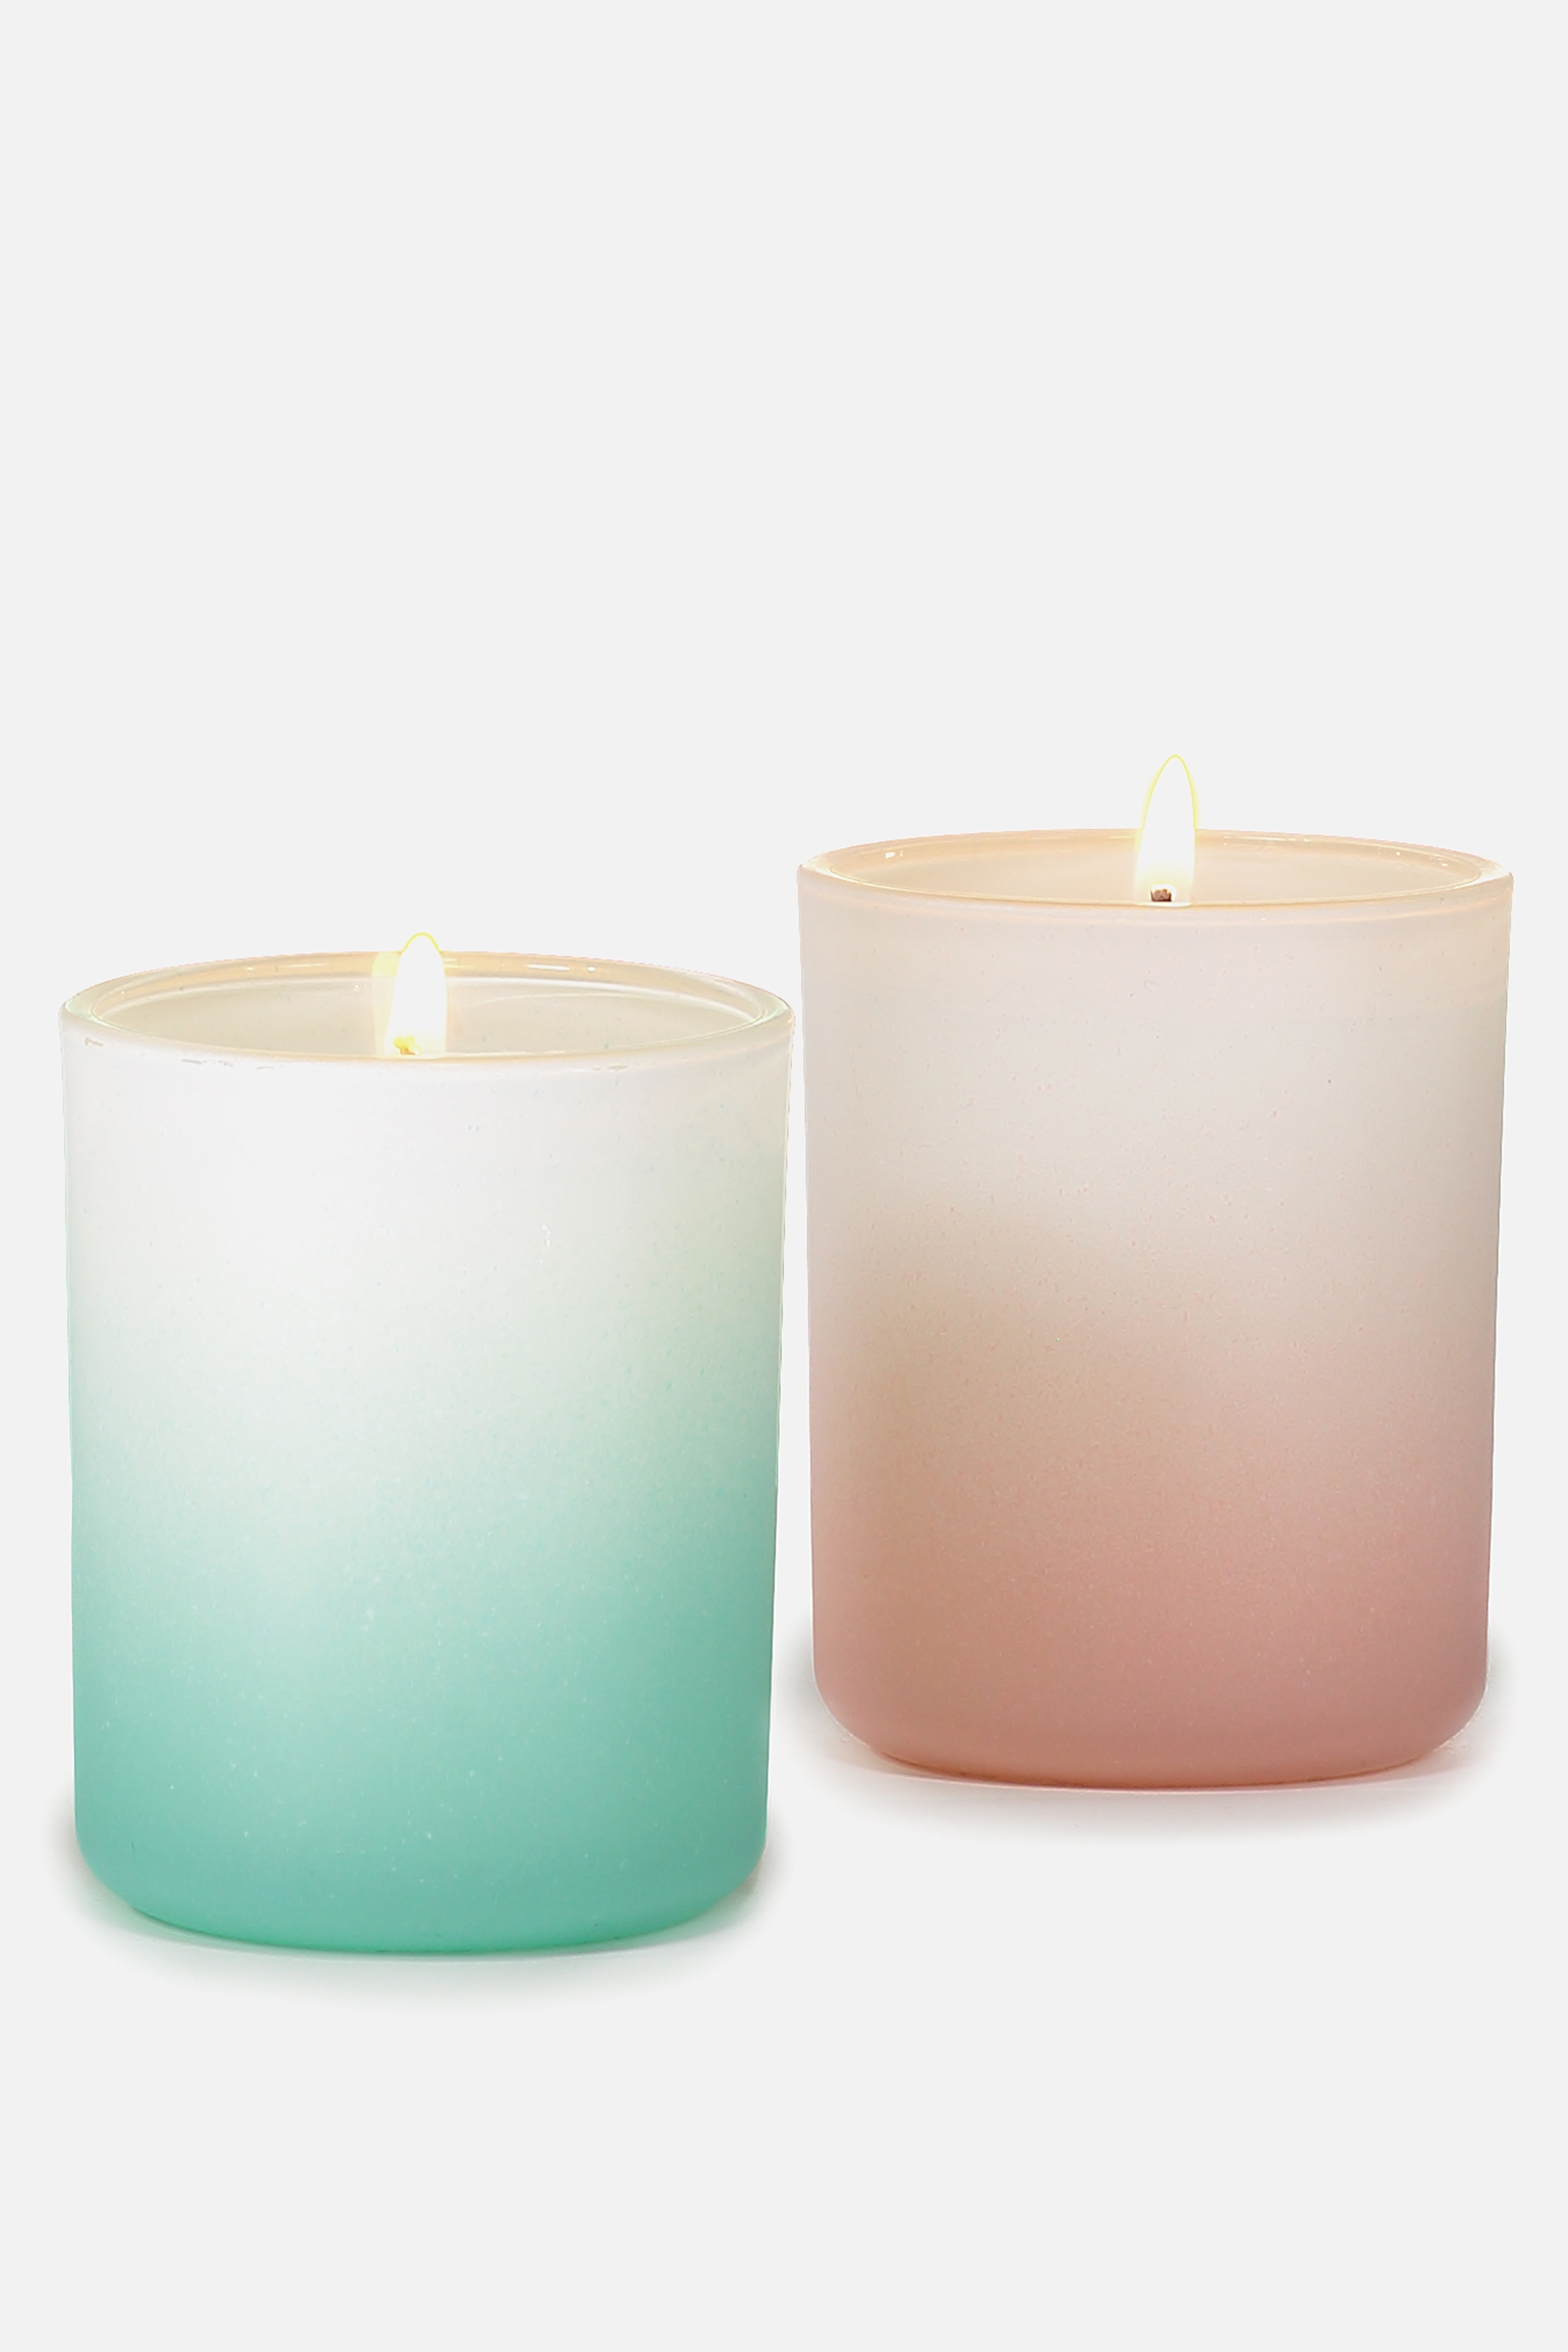 Ombre candles from Typo